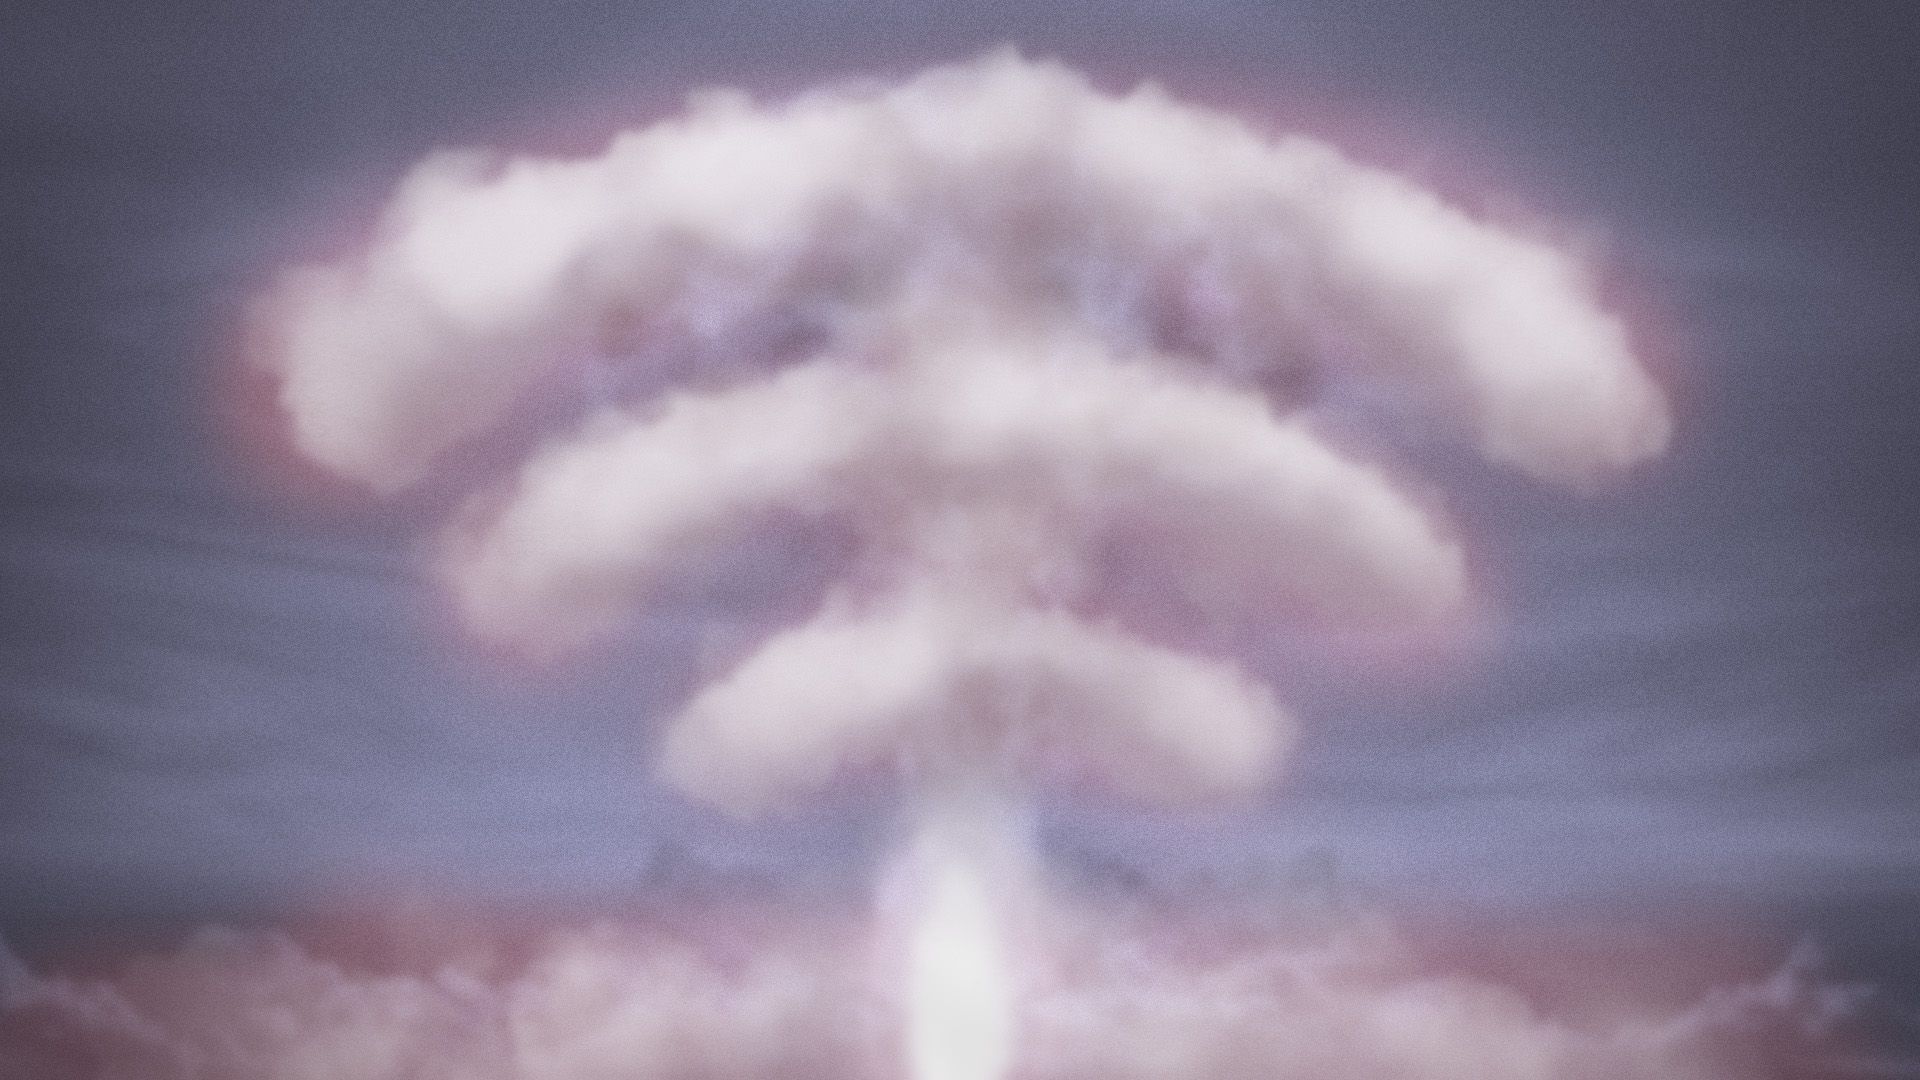 Illustration of a mushroom cloud in the shape of the 3G symbol